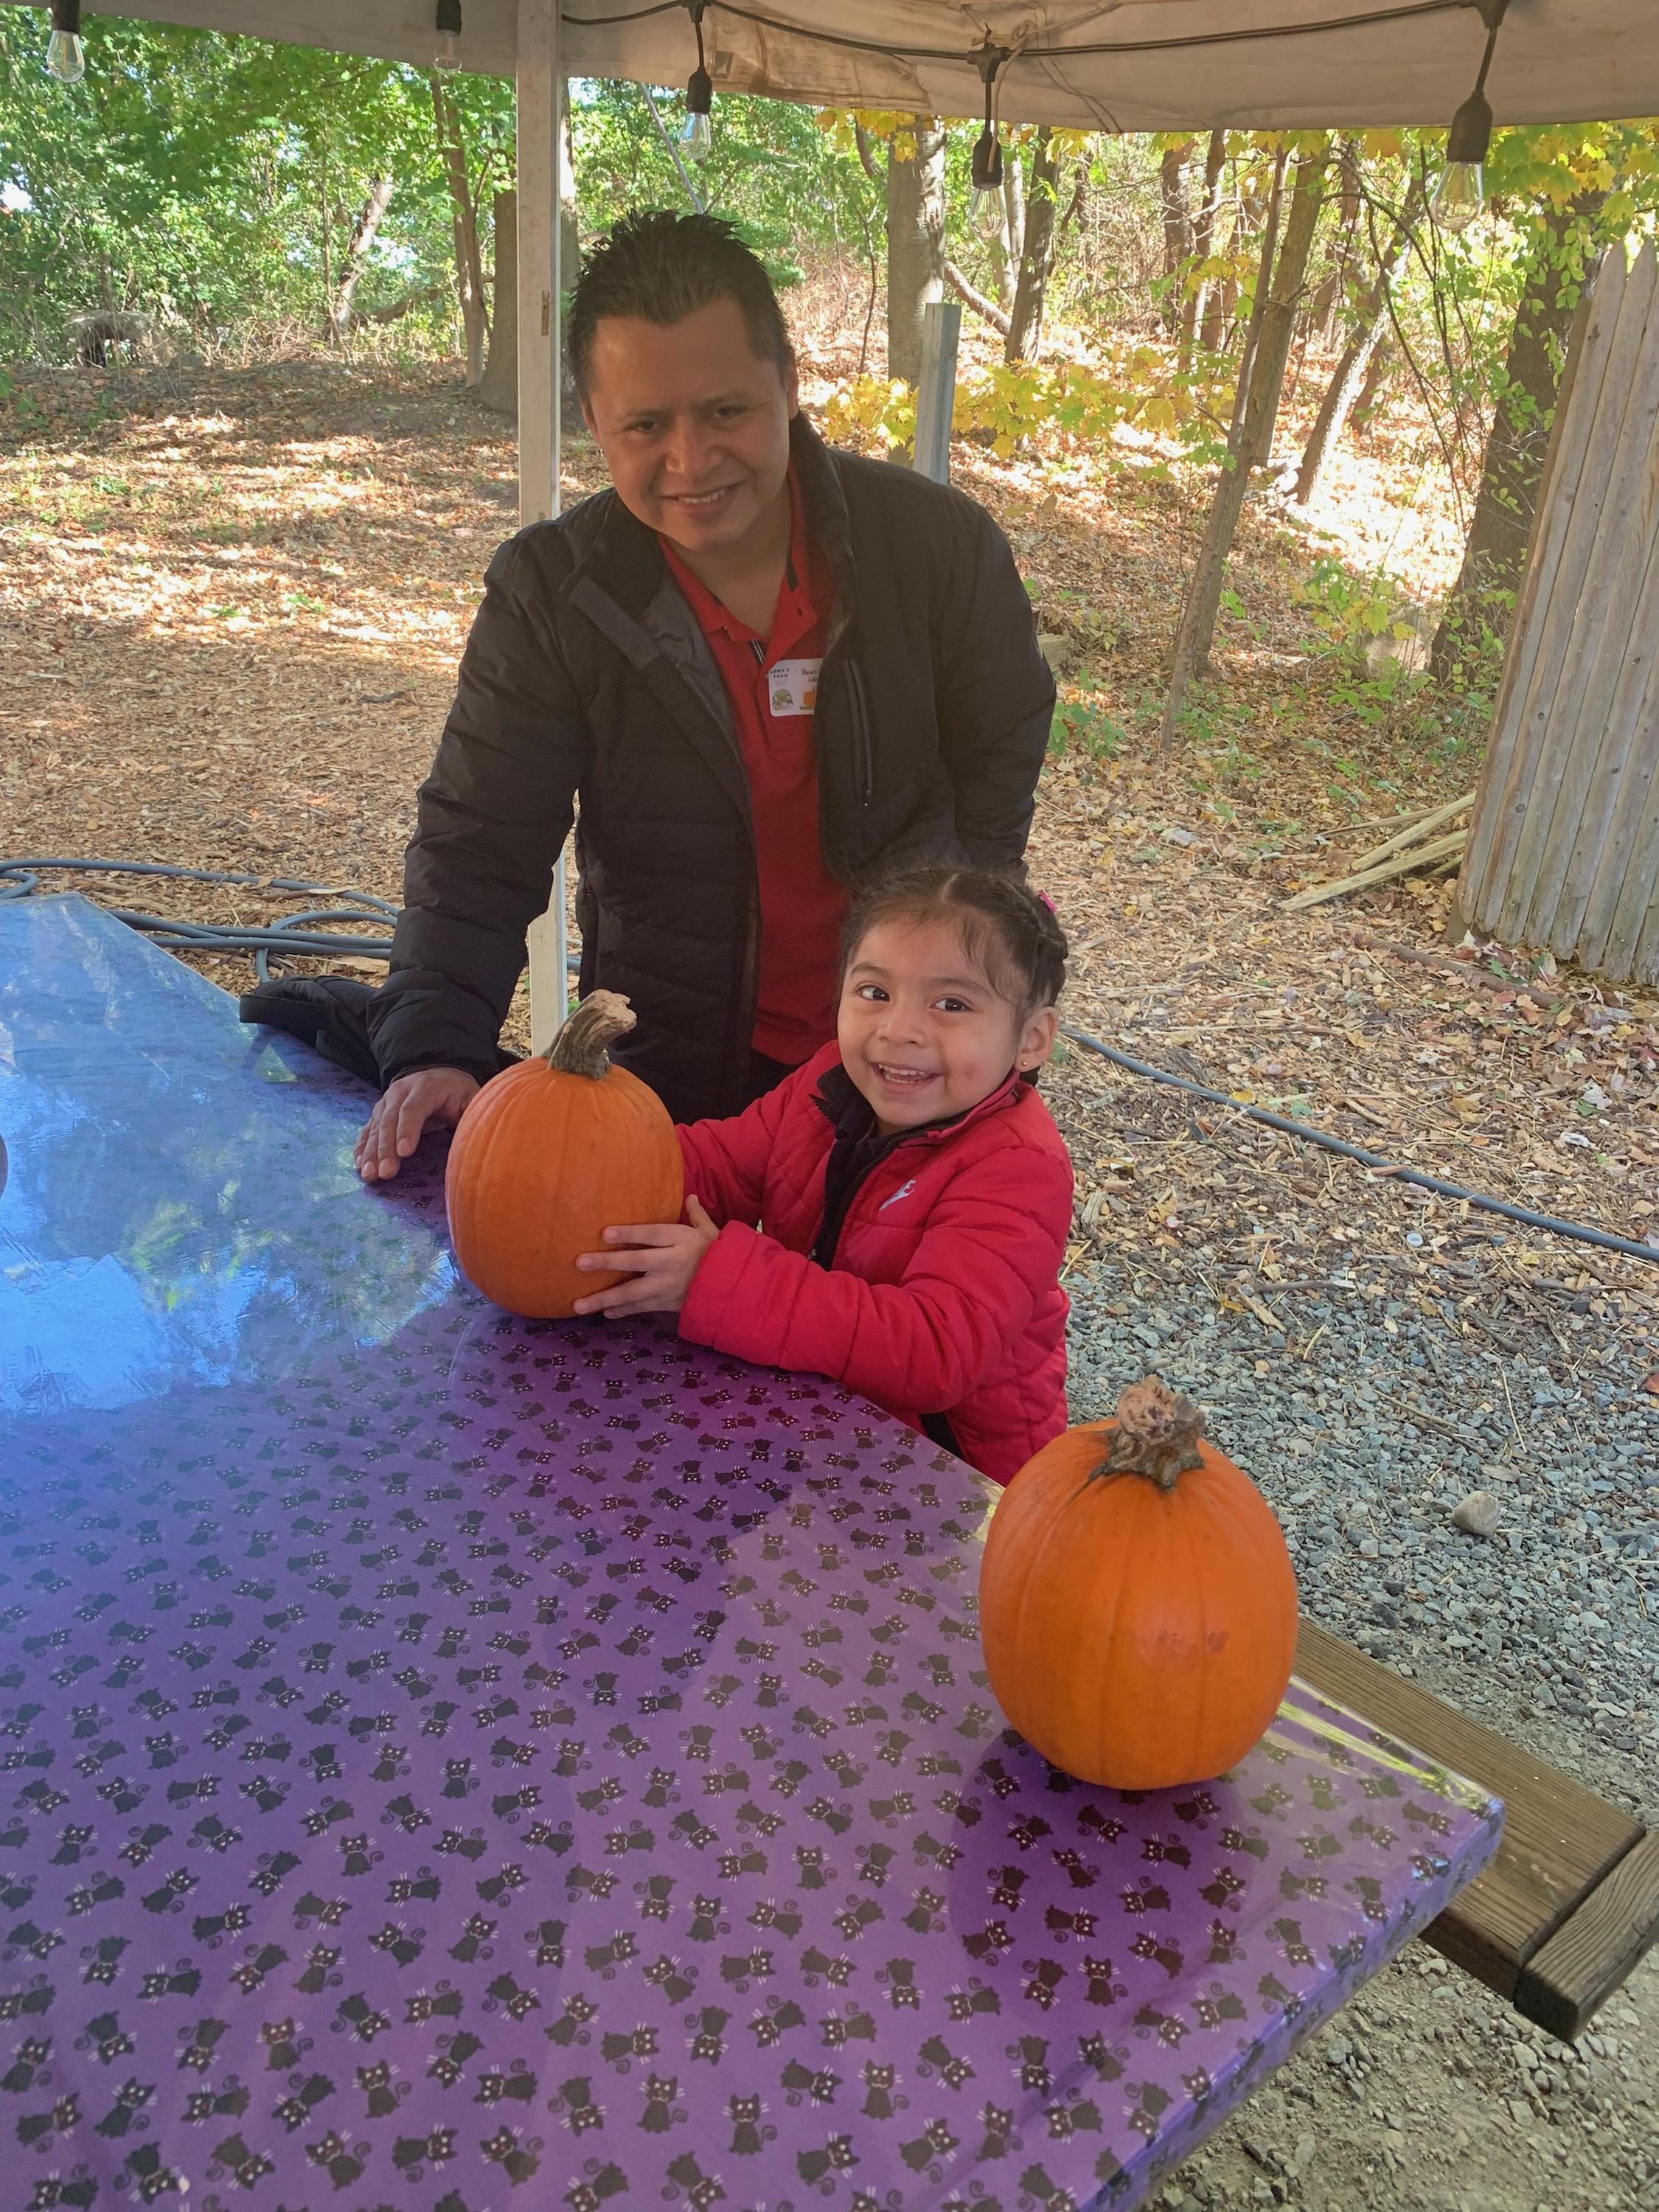 Dad and happy daughter with a medium sized pumpkin